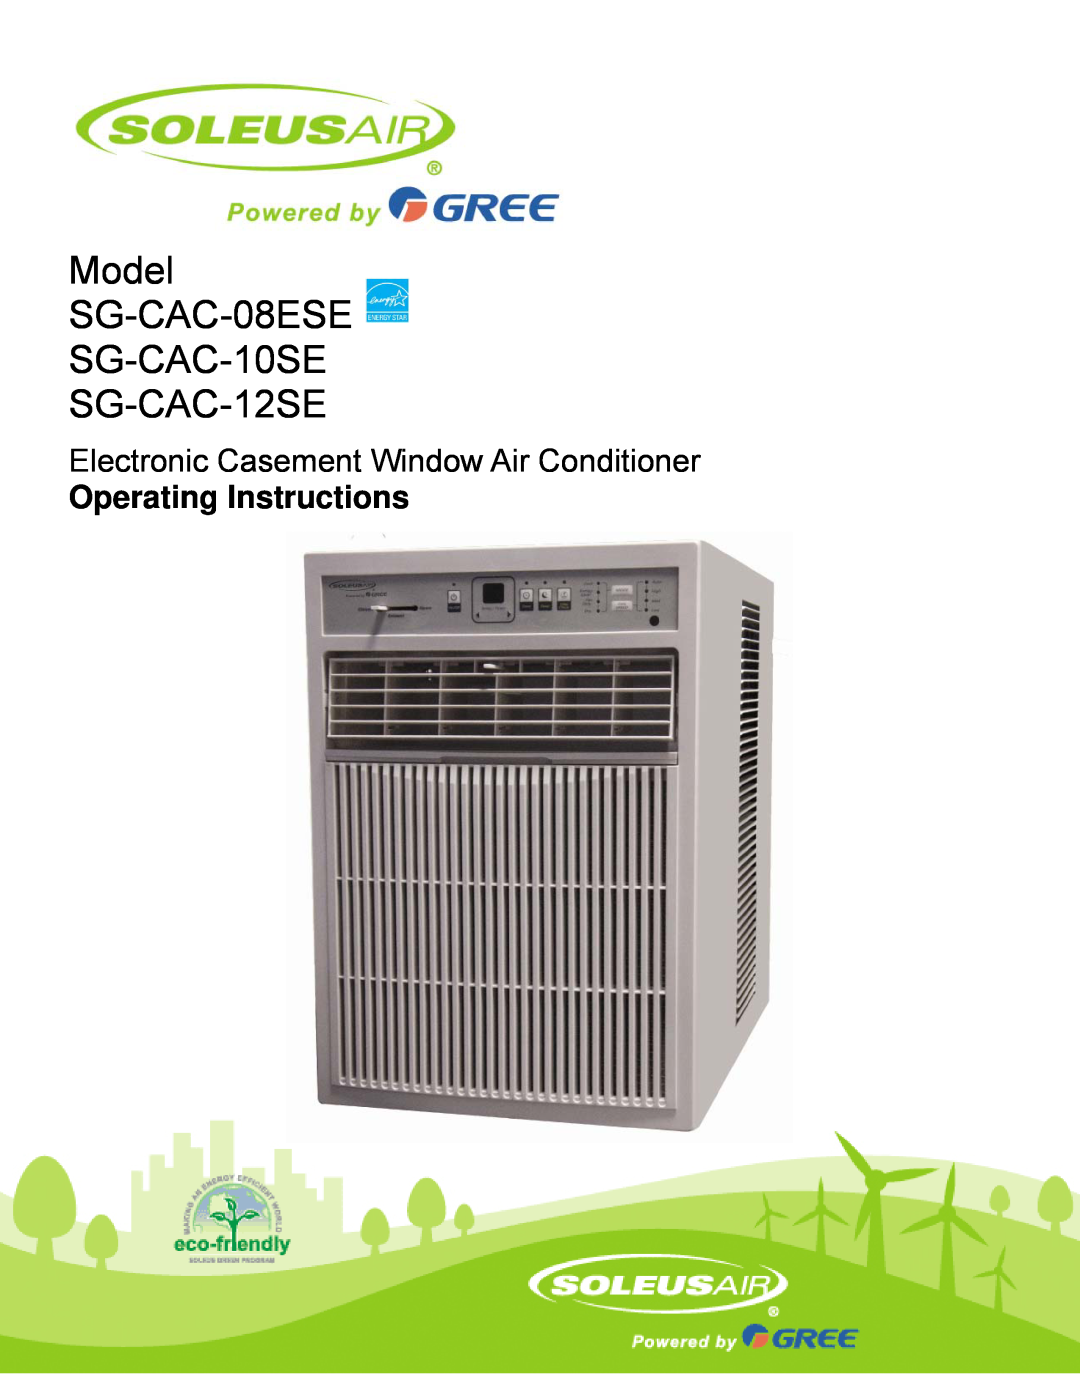 Soleus Air manual Model Number SG-CAC-08ESE, Electronic Casement Window Air Conditioner, Operating Instructions 